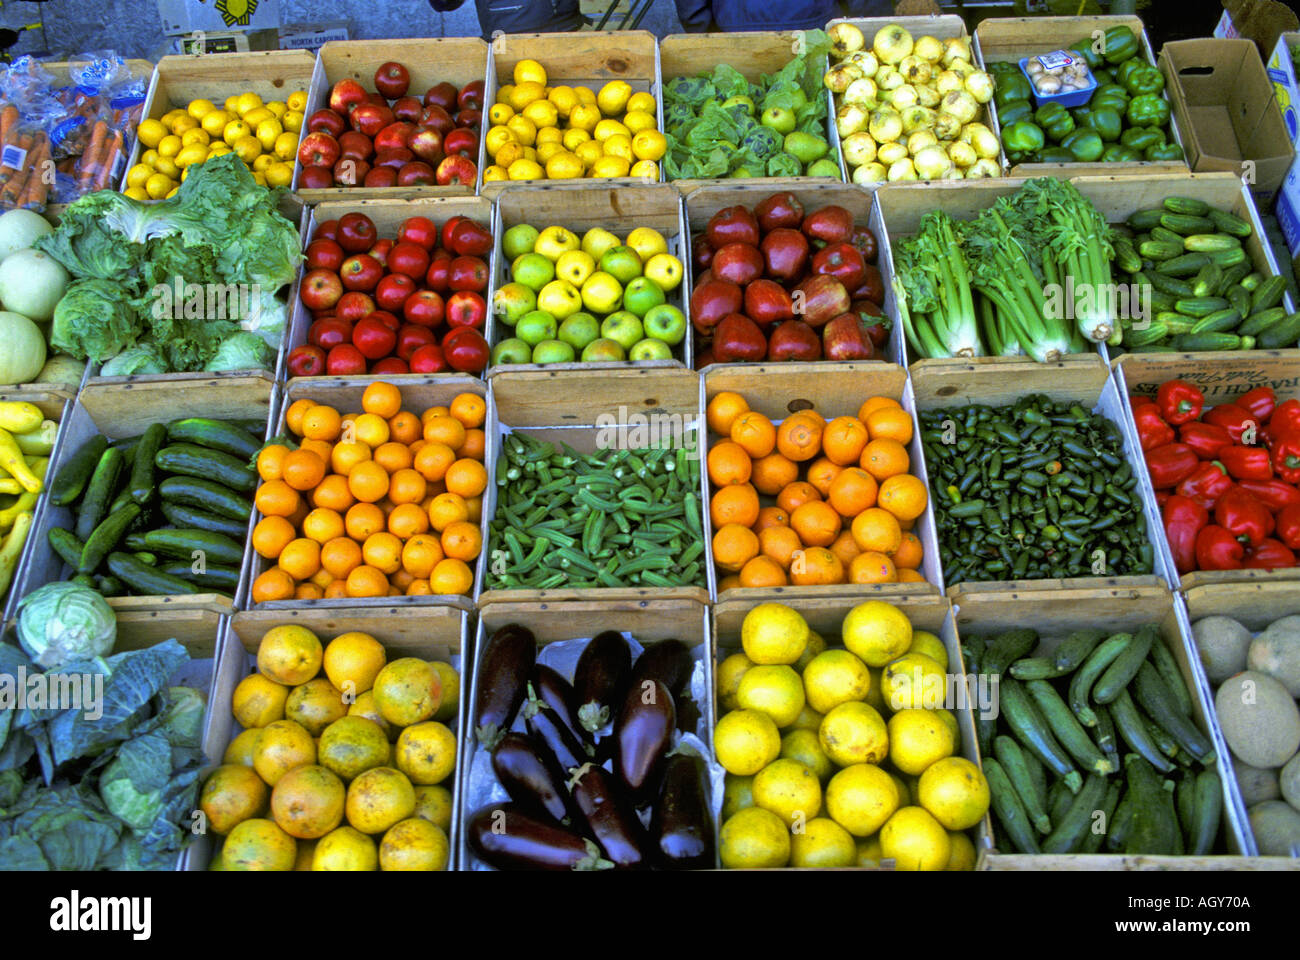 Fresh Fruits And Vegetables Farmers Market